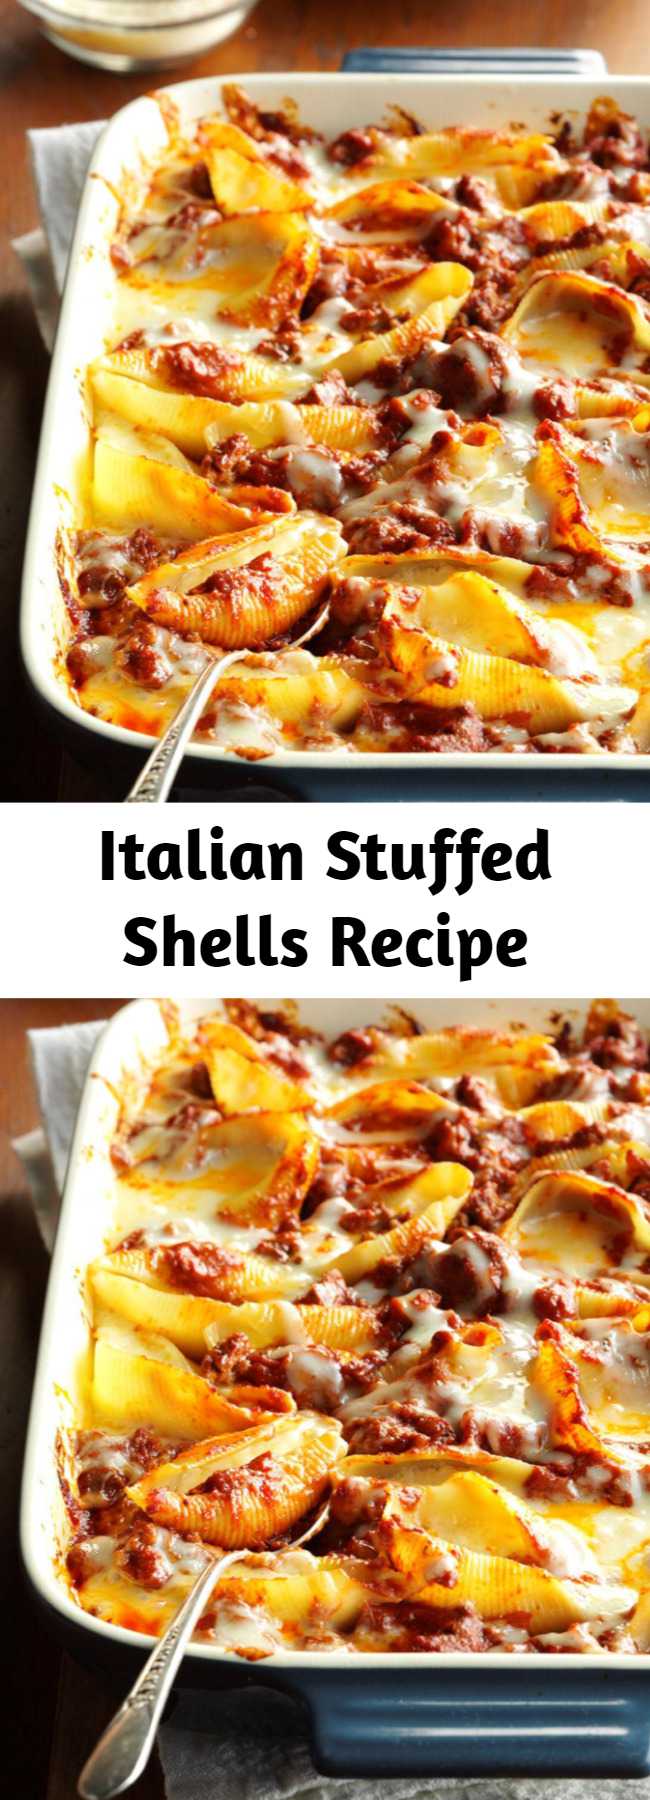 Italian Stuffed Shells Recipe - A dear friend first brought over this stuffed shells recipe. Now I take it to other friends' homes and to potlucks, because it's always a big hit! Simple and delicious.